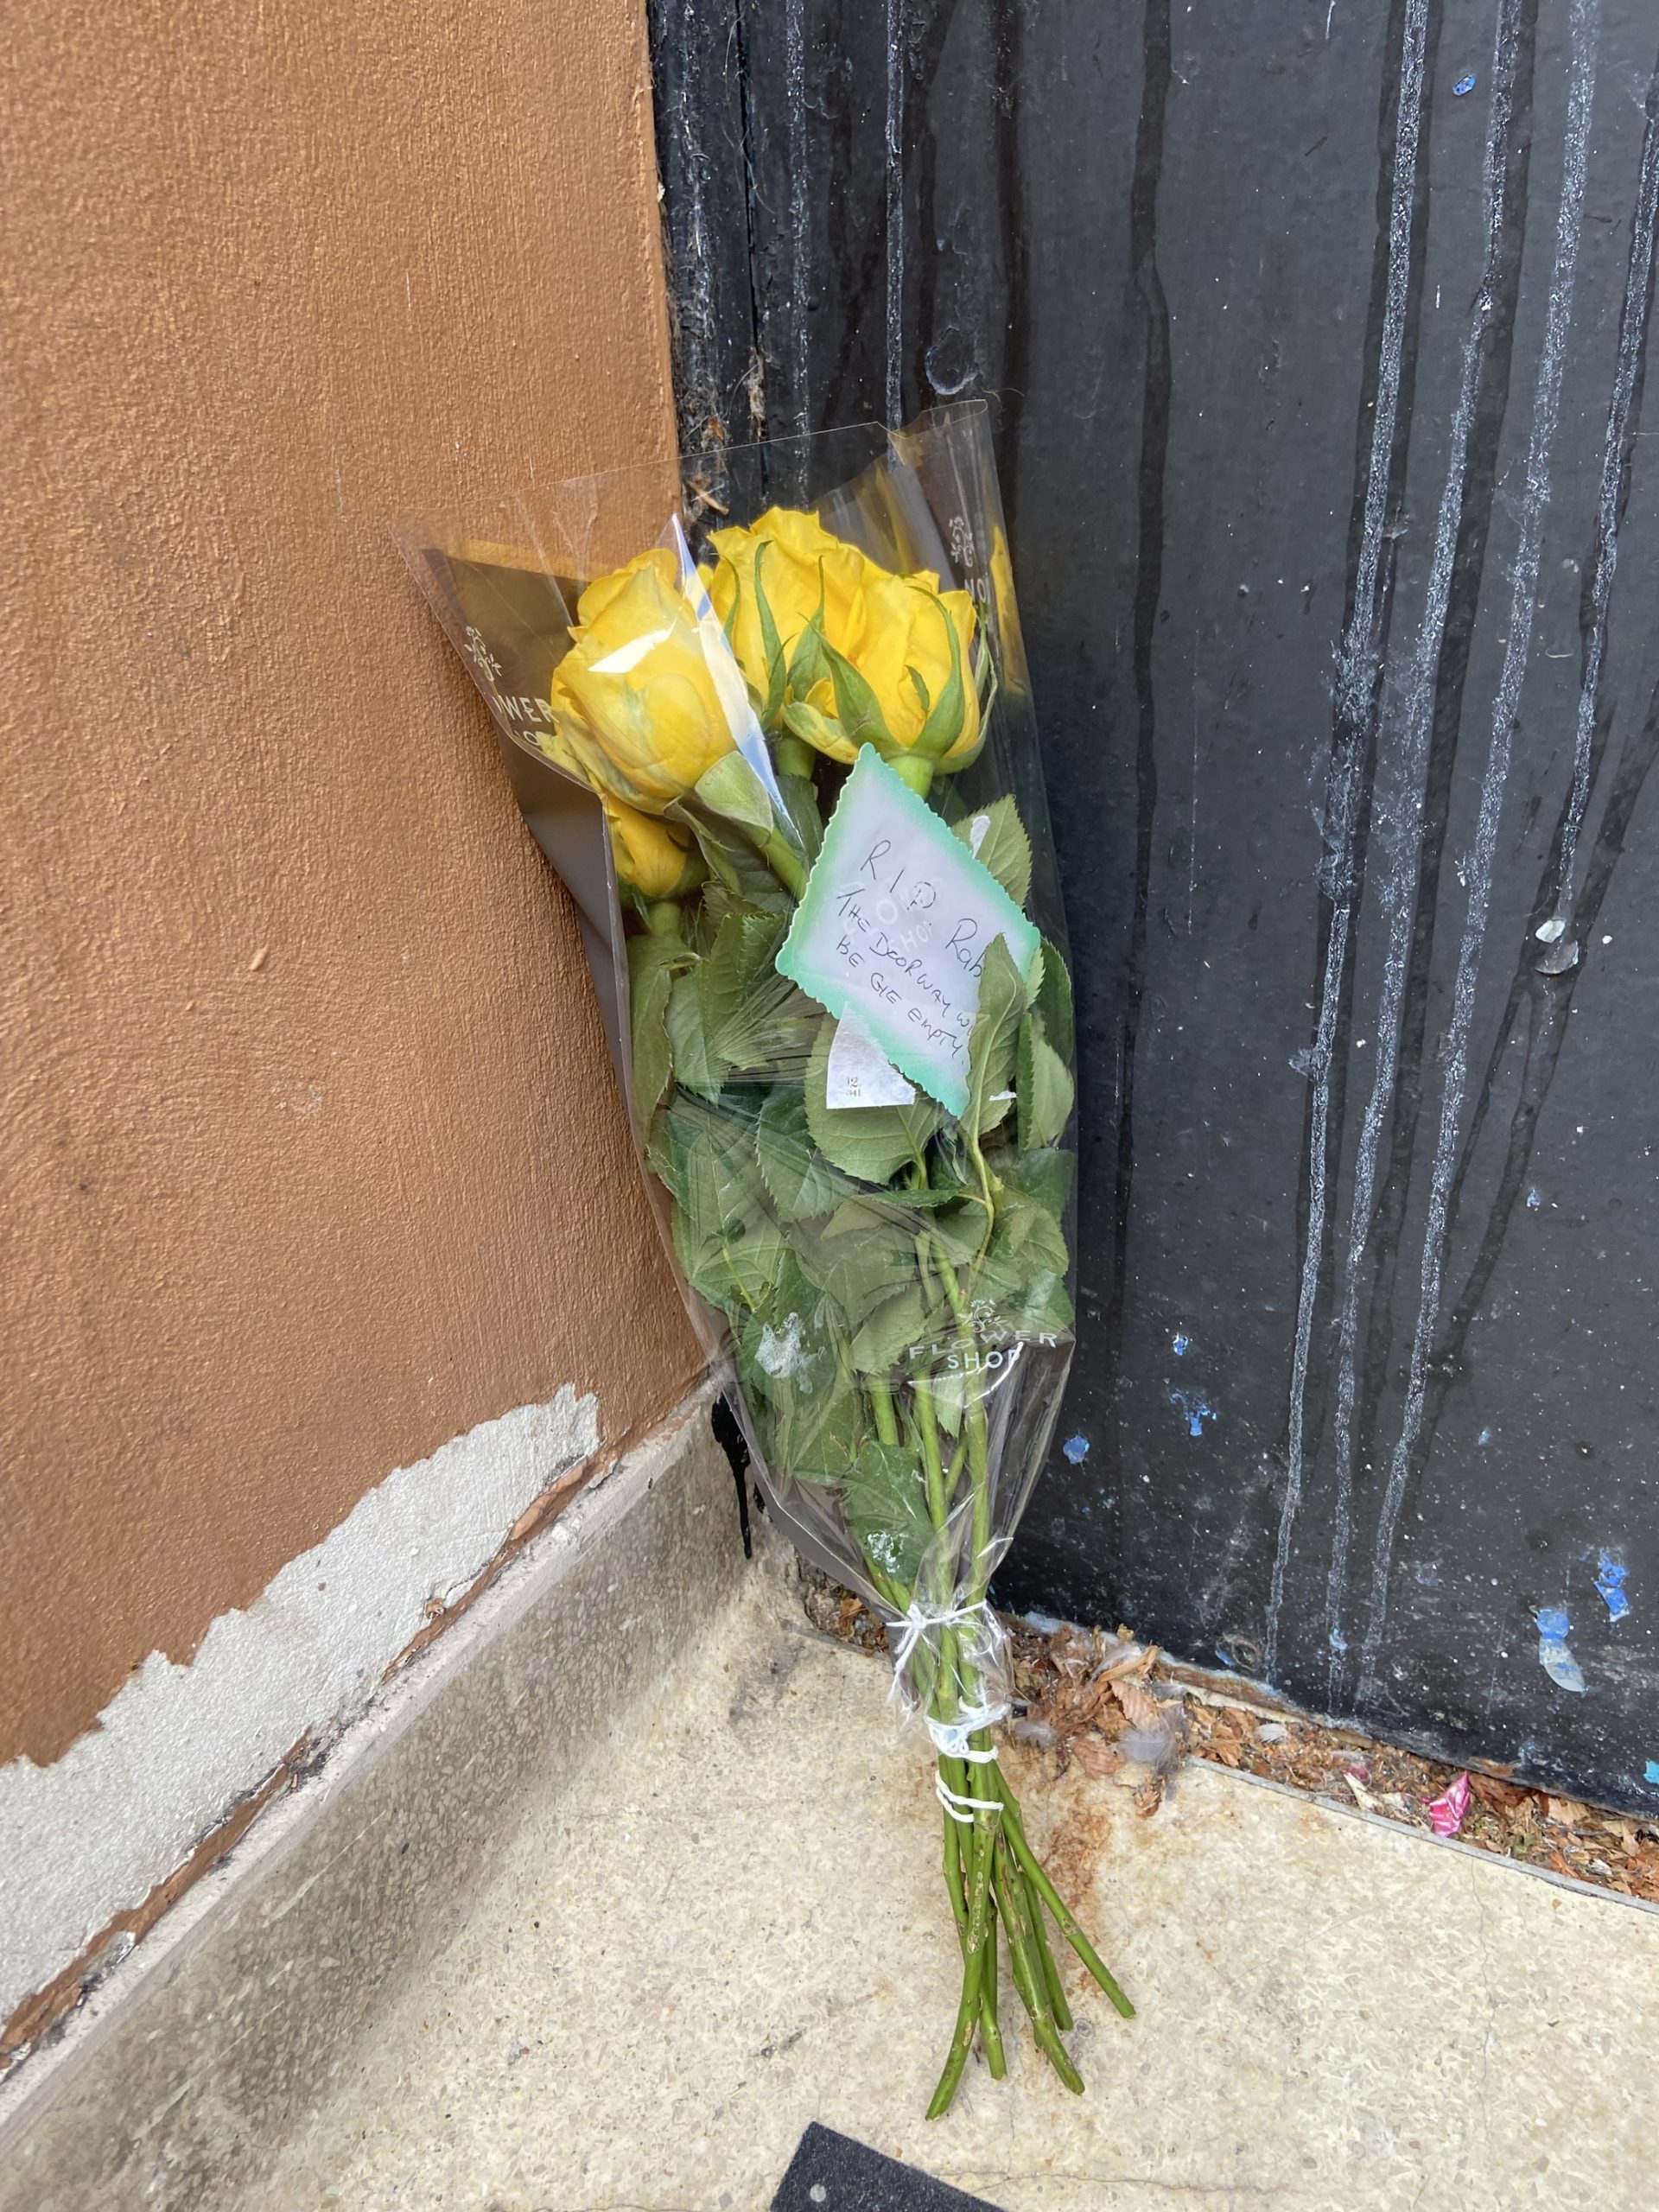 A note on one of the floral tributes paid tribute to Rab